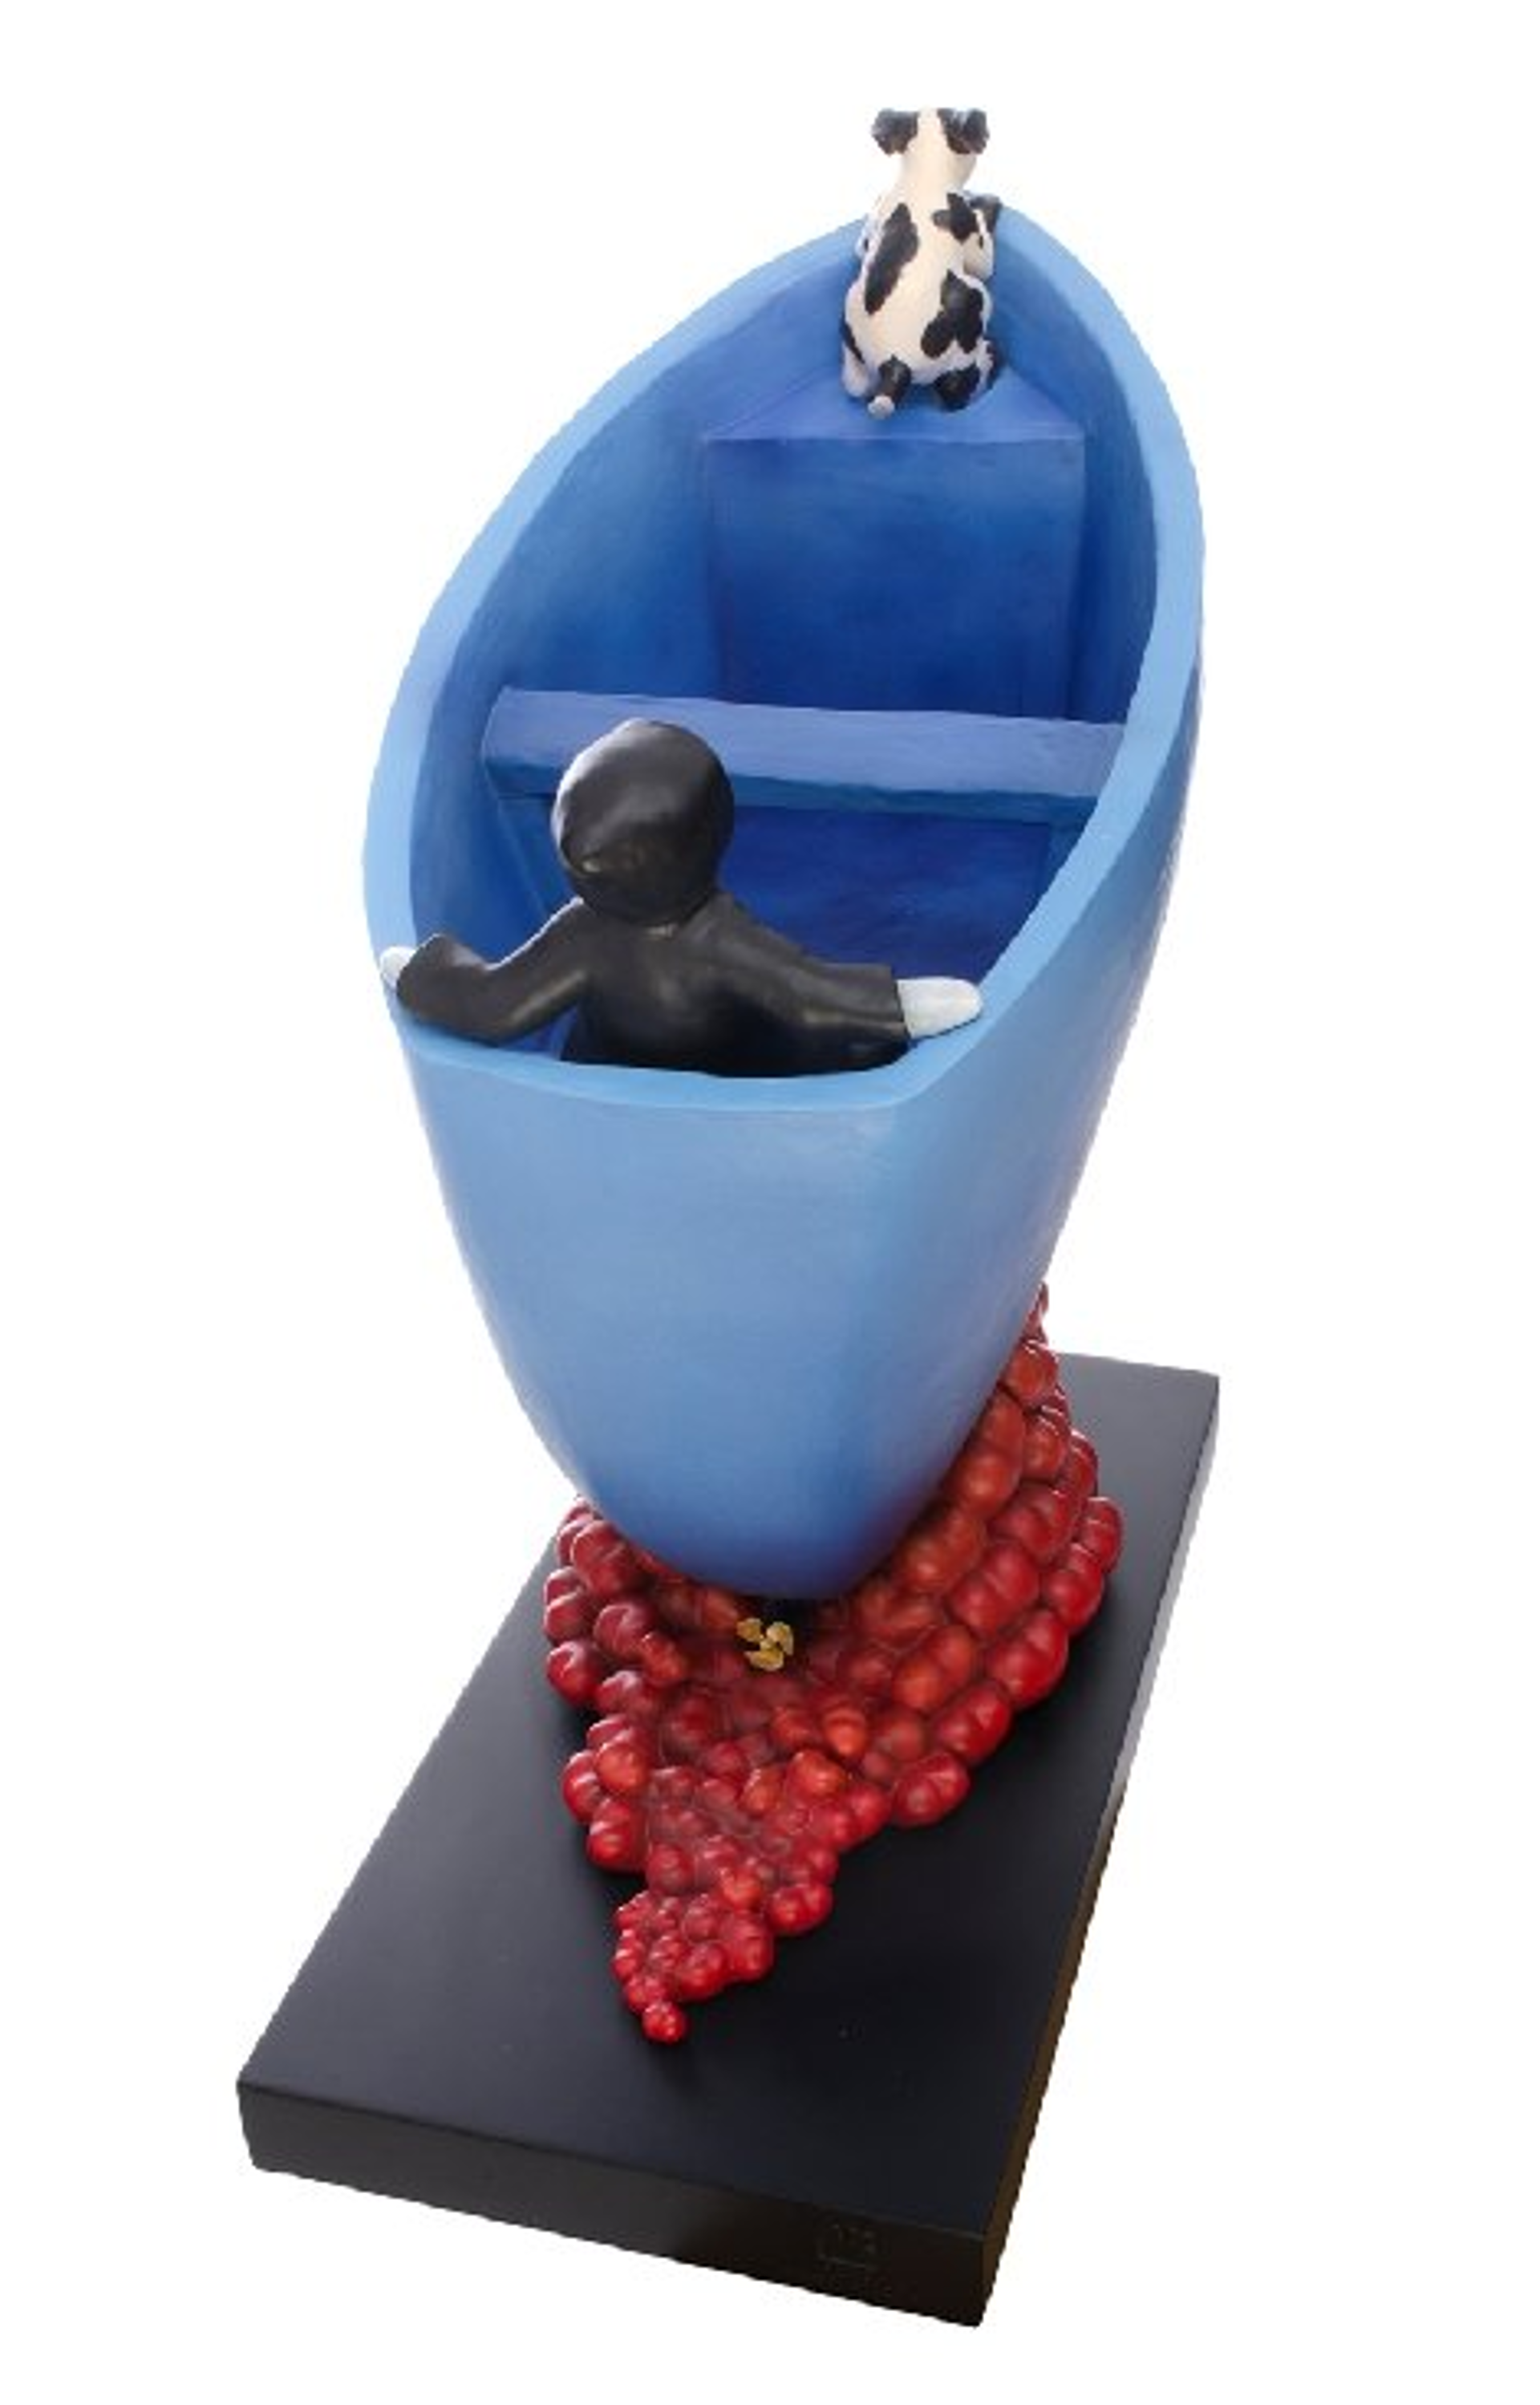 Over the Sea of Love by Mackenzie Thorpe - Sculpture